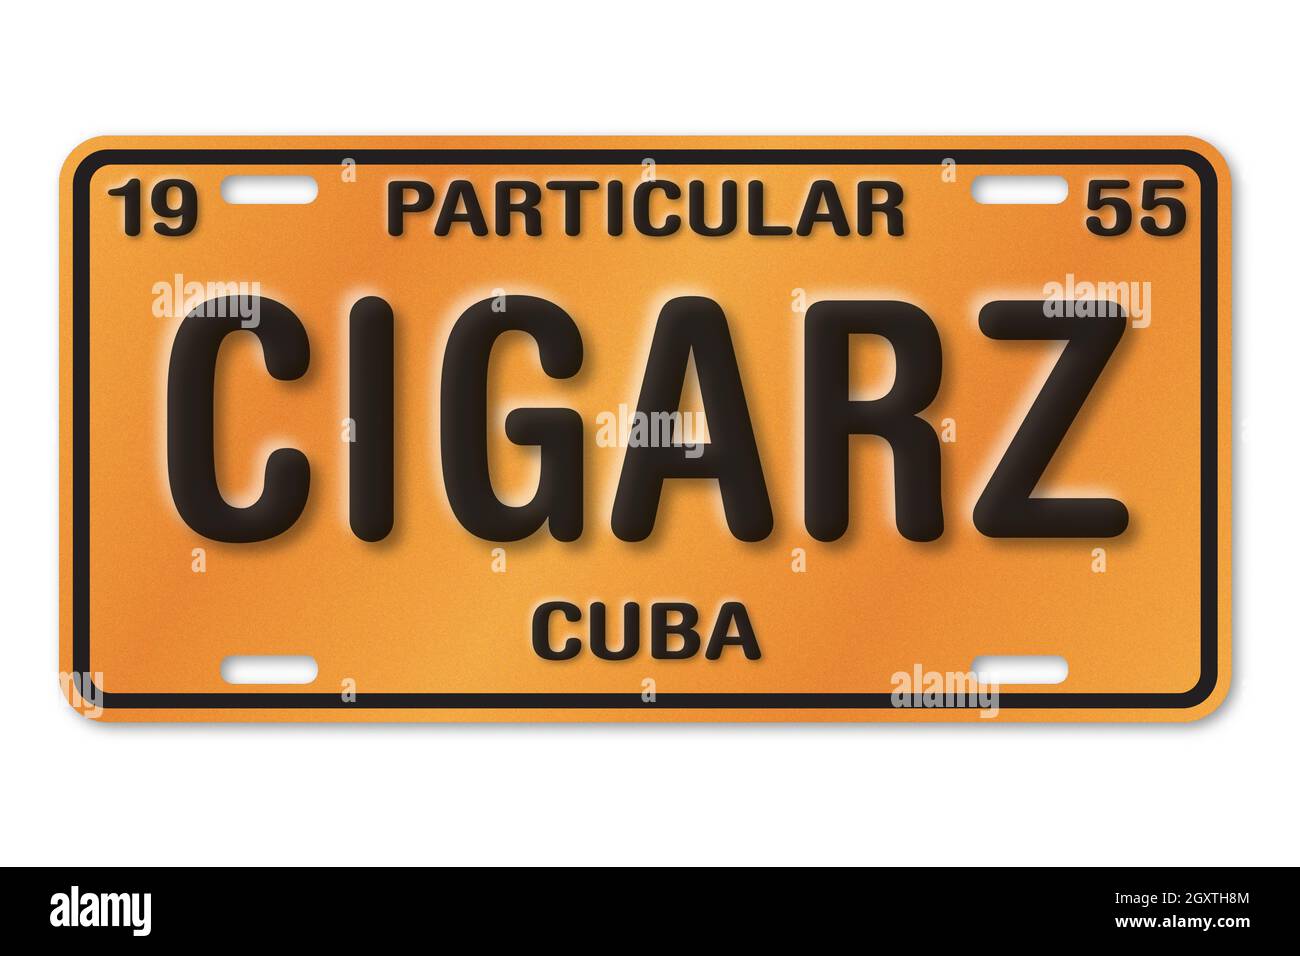 Illustration of orange and black Cuban license plate, 1955, 'Particular' means privately owned. Custom text says CIGARZ, a spelling of cigars. Stock Photo